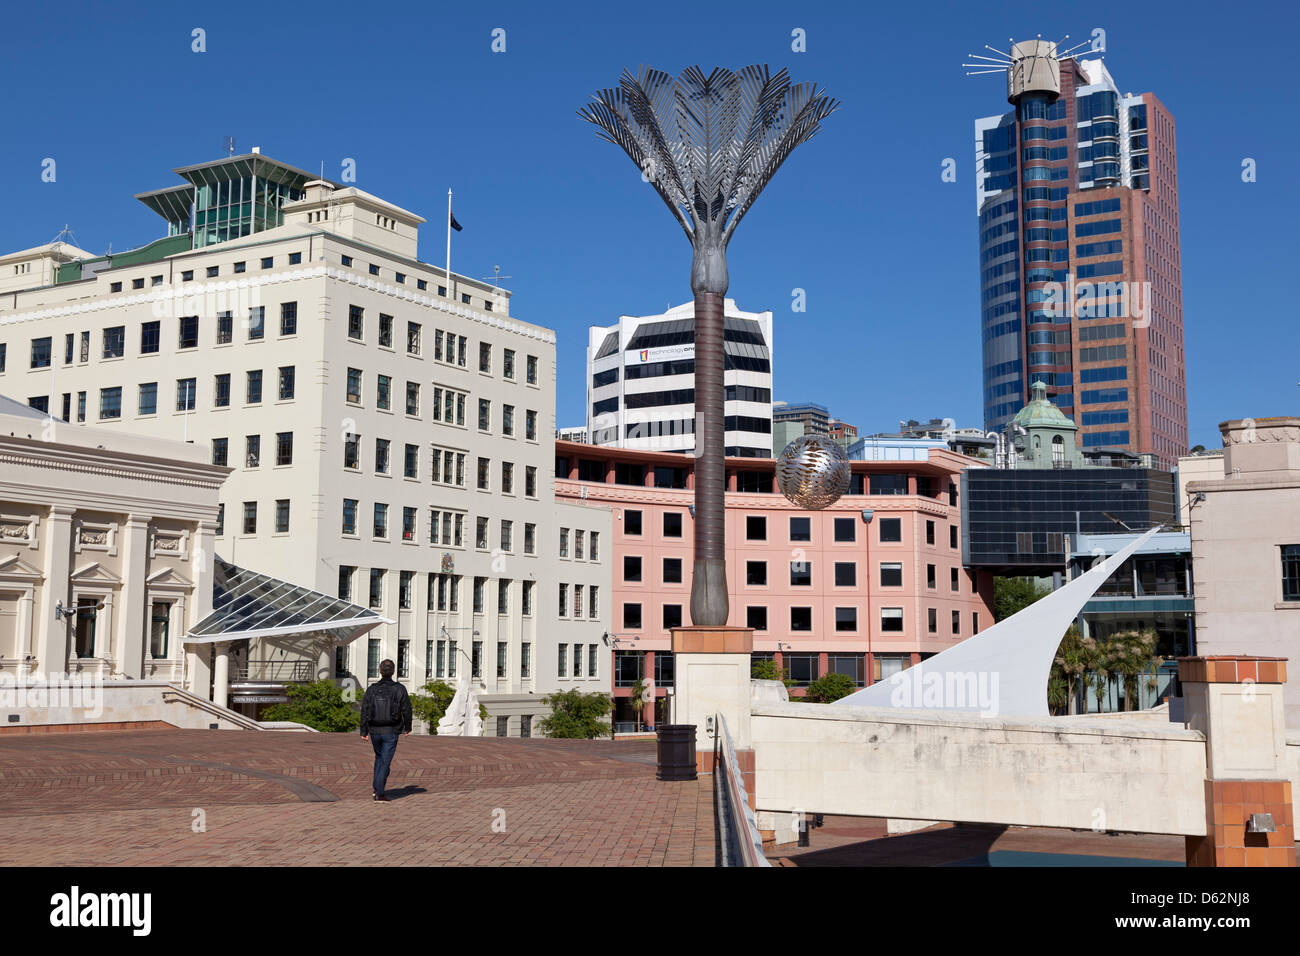 City Square with the Fern sculpture by Neil Dawson ,Wellington, New Zealand Stock Photo